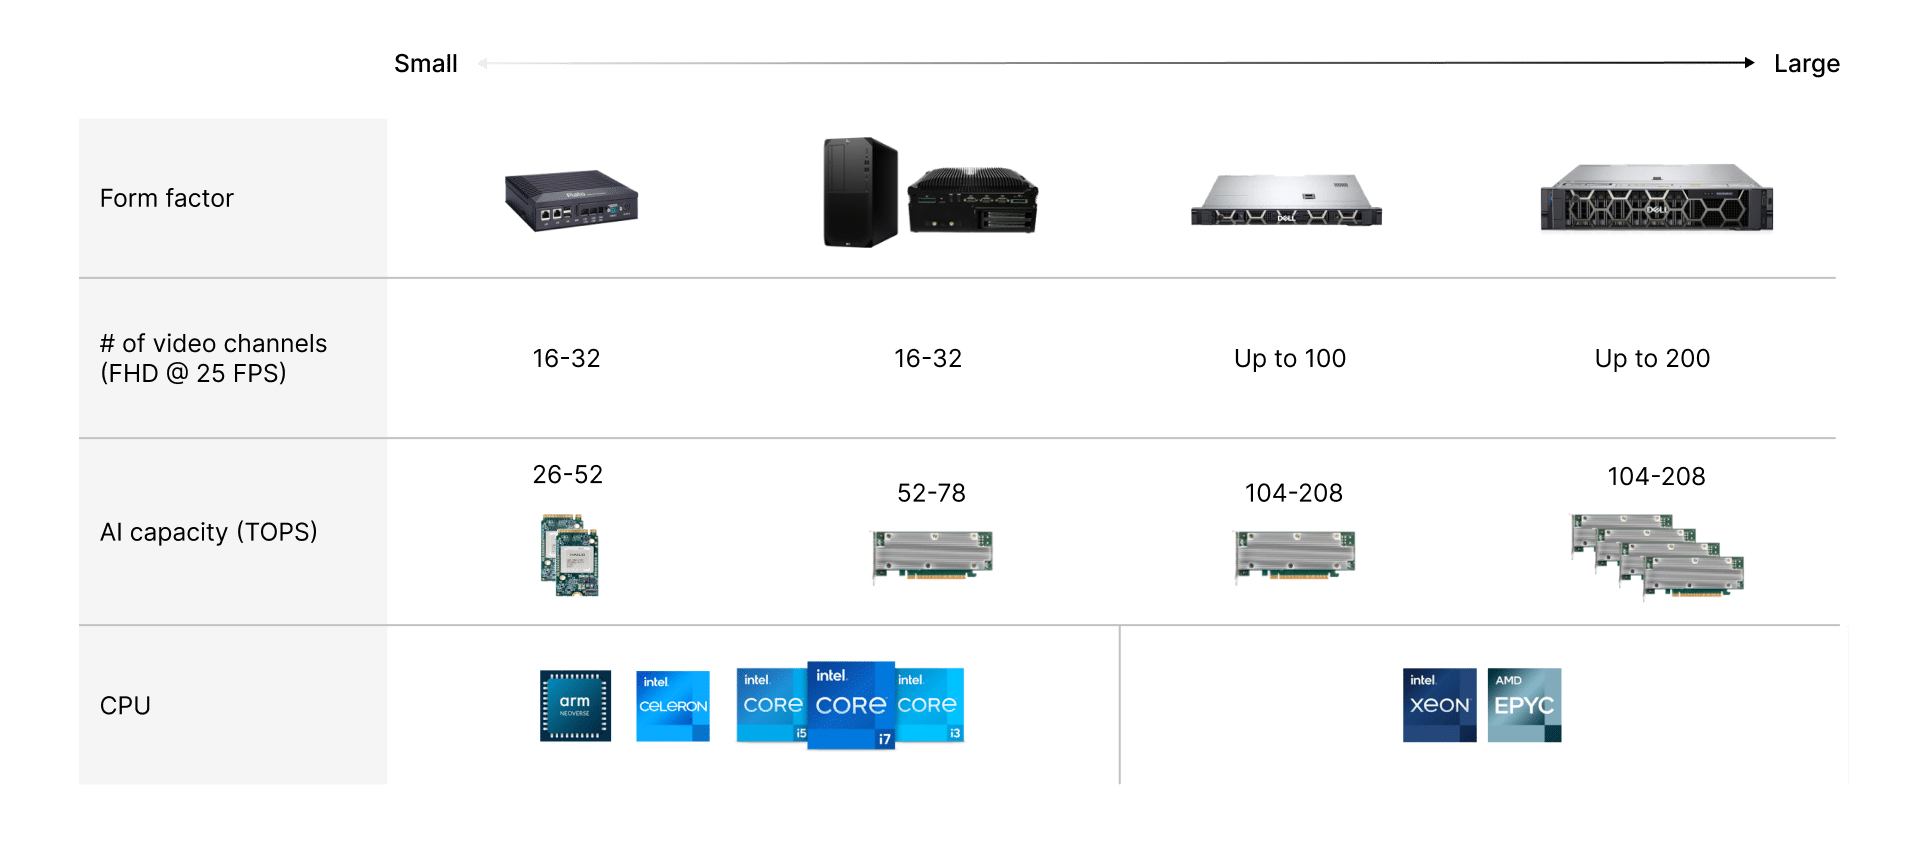 Scalable solutions for video management systems ranging 16-200 video channels